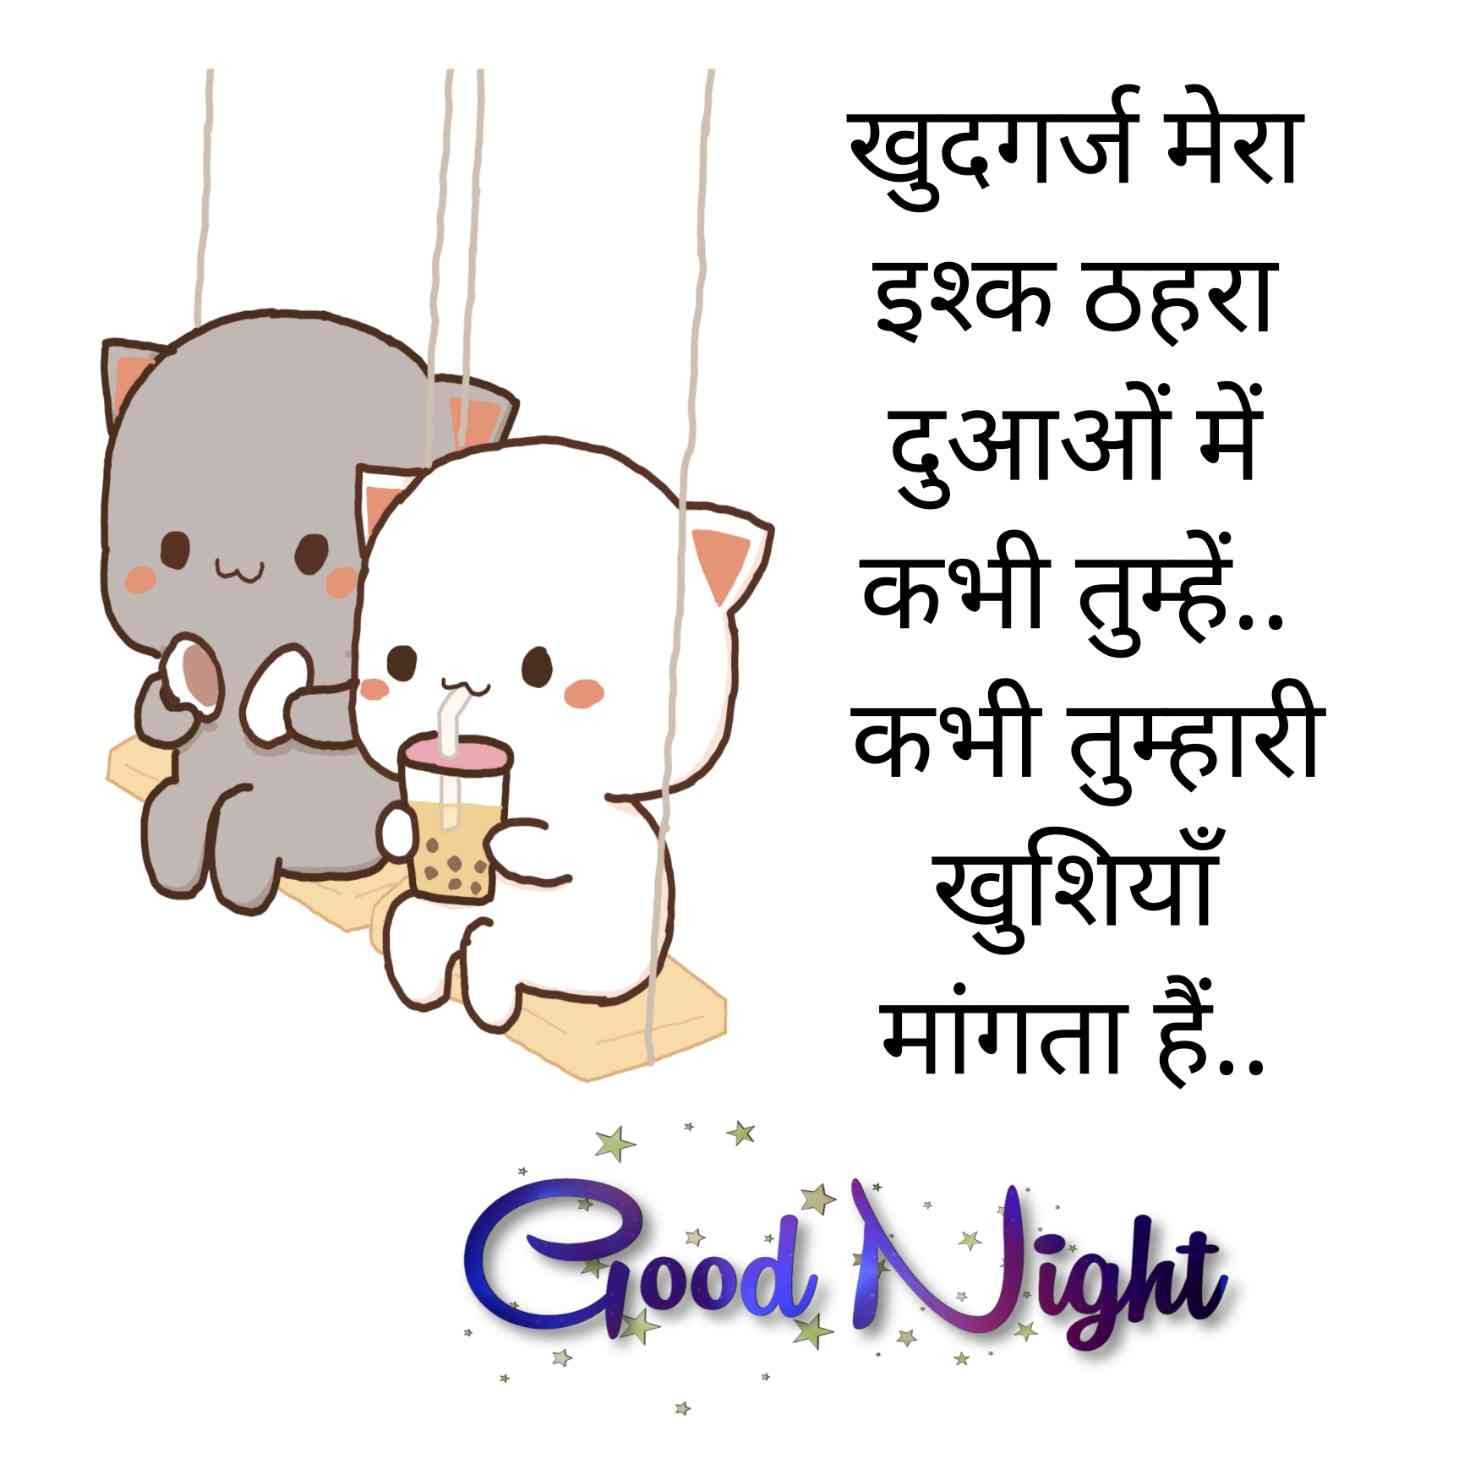 Good Night love quotes in hindi text